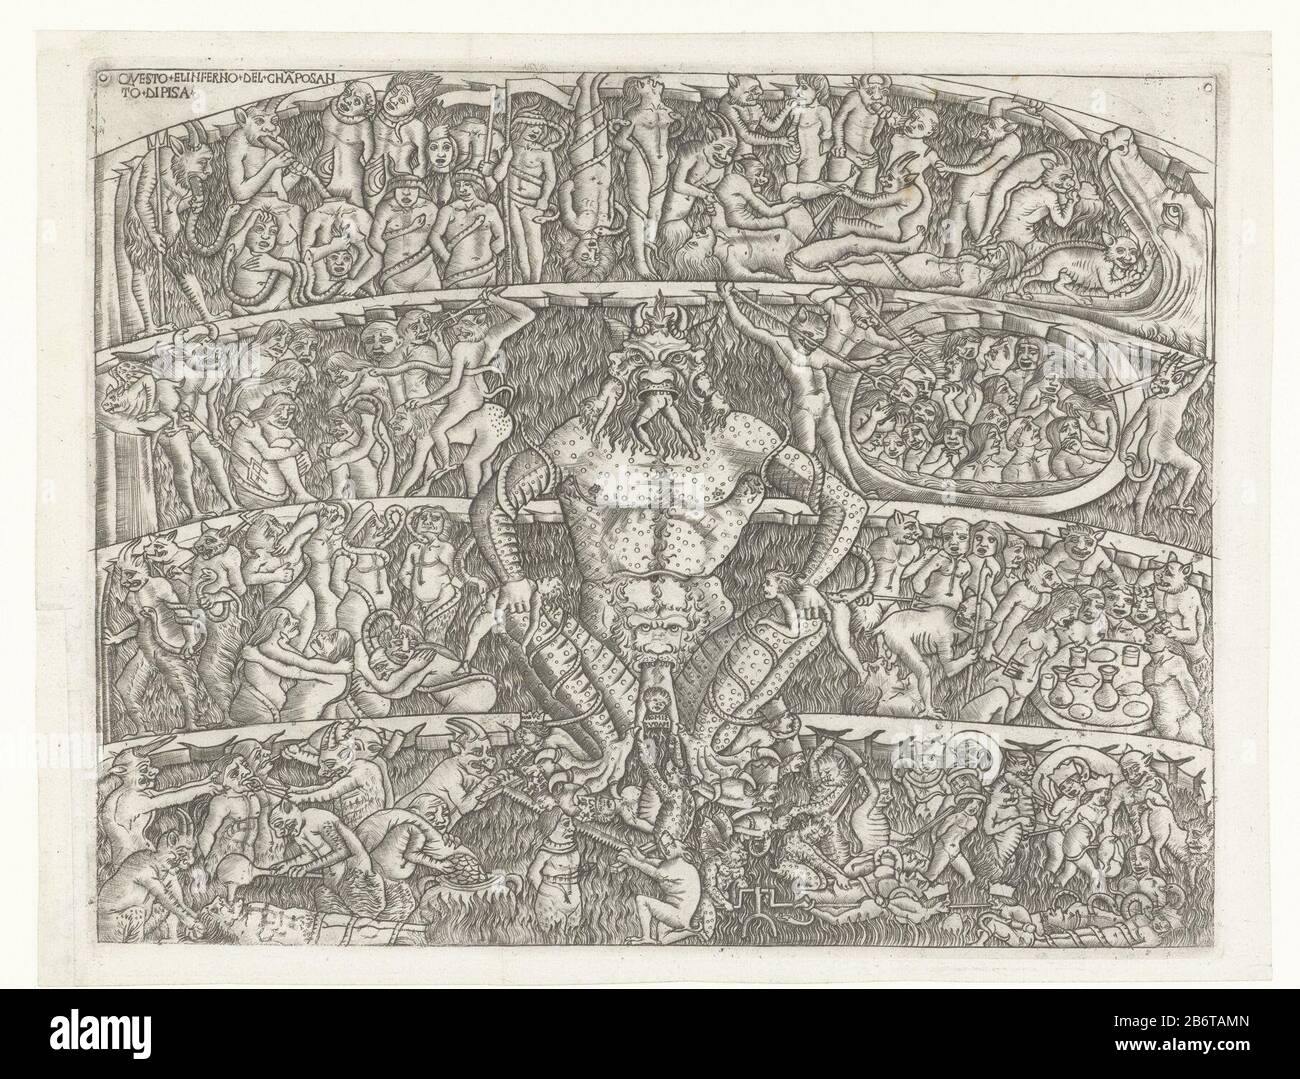 Hel met Satan en bestraffing van zondaars door demonen Questo el inferno del chapo santo di Pisa (titel op object) hell proposed as described in Dante's Inferno. Satan enthroned in the middle of each of his three mouths a sinner. In various layers wicked are those represented, for example, is made to sin greed and lust. They are punished by demons. Top right is a gaping maw of the monster Leviathan zichtbaar. Manufacturer : printmaker: anonymous to design: called Orcagna Andrea di Cione (attributed to) Place manufacture: Italy Date: 1460 - 1480 Physical features: car material: paper Technique: Stock Photo